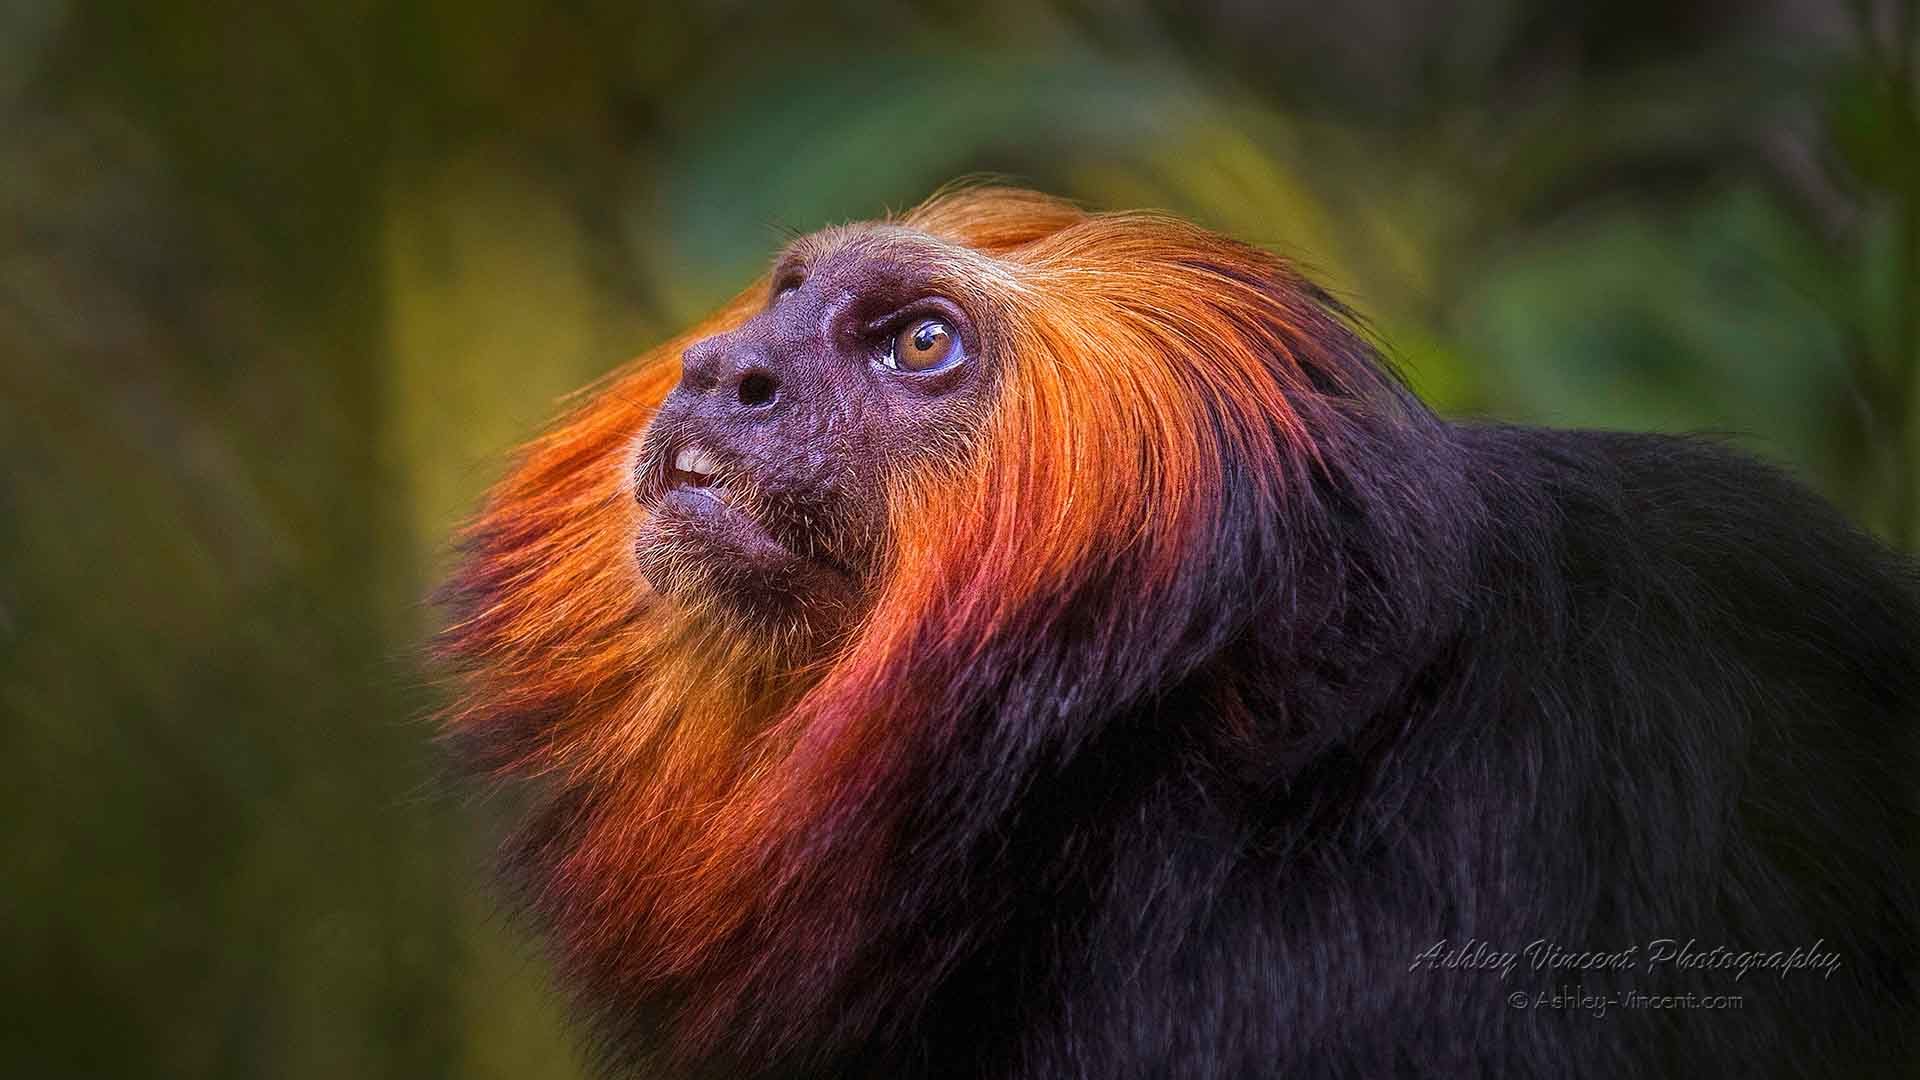 Golden-Headed Lion Tamarin in profile looking upward by ashley vincent